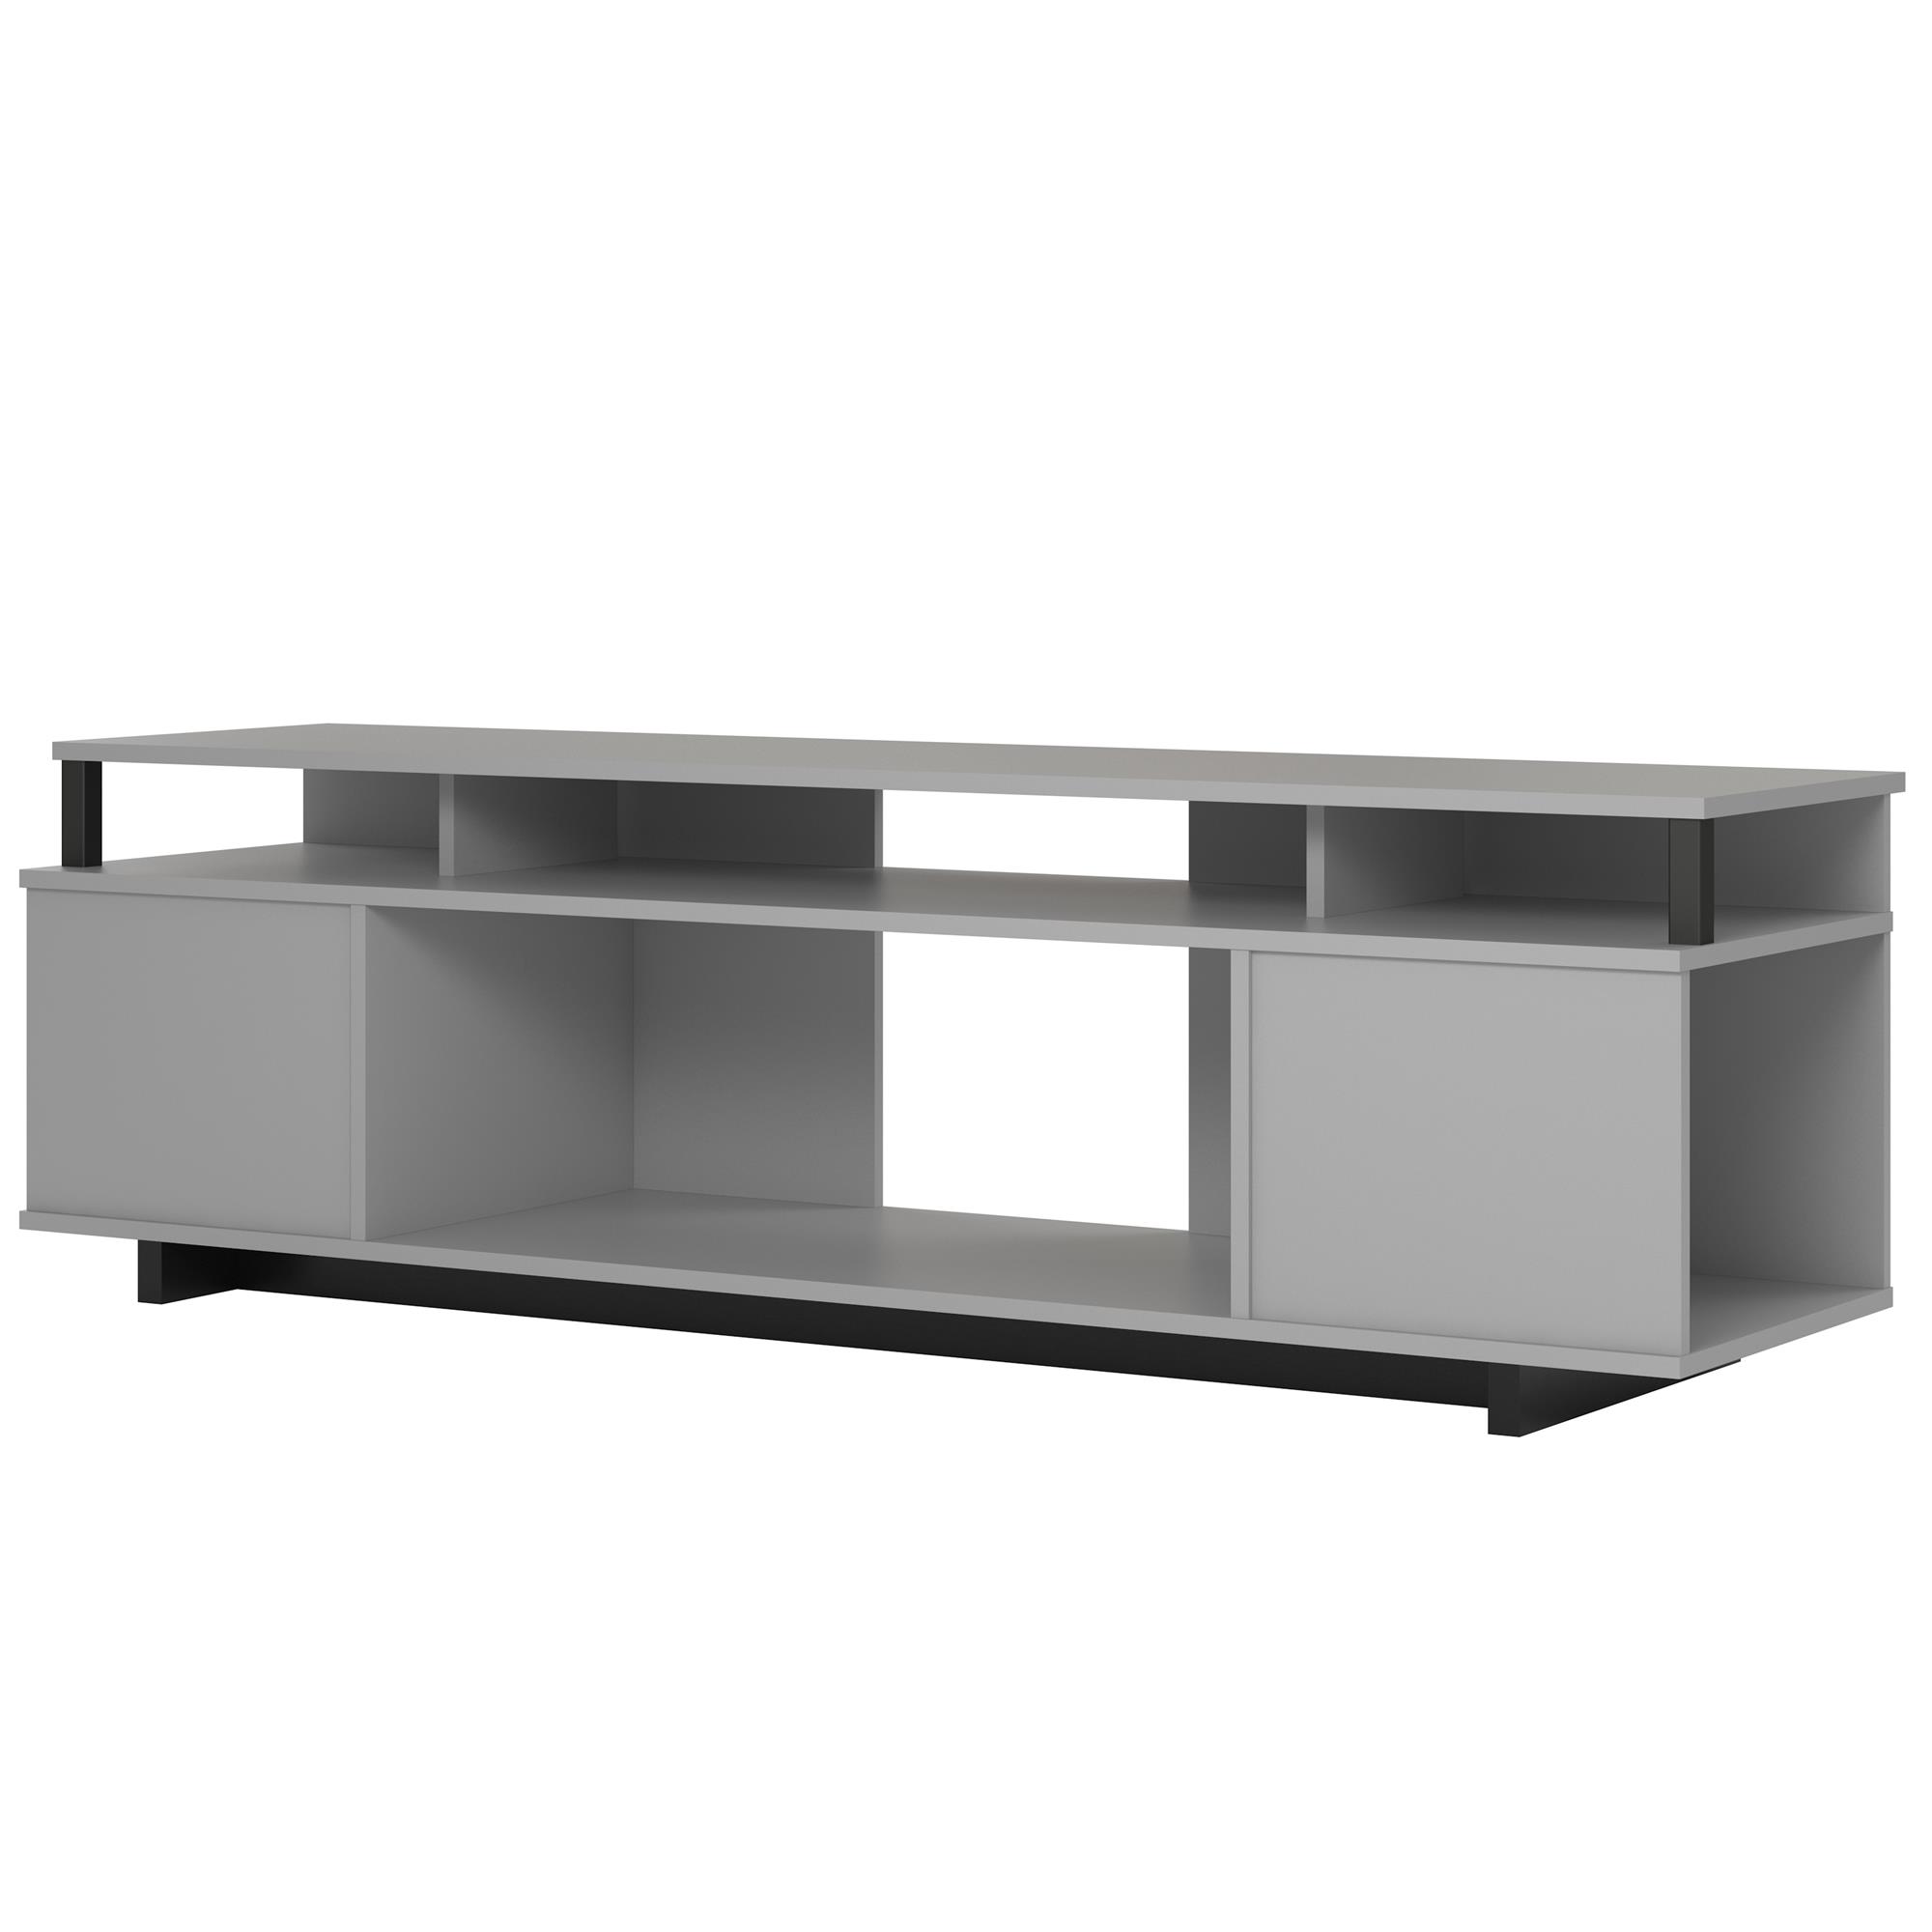 Ameriwood Home Kensington Place TV Stand for TVs up to 65", Dove Gray - image 2 of 5